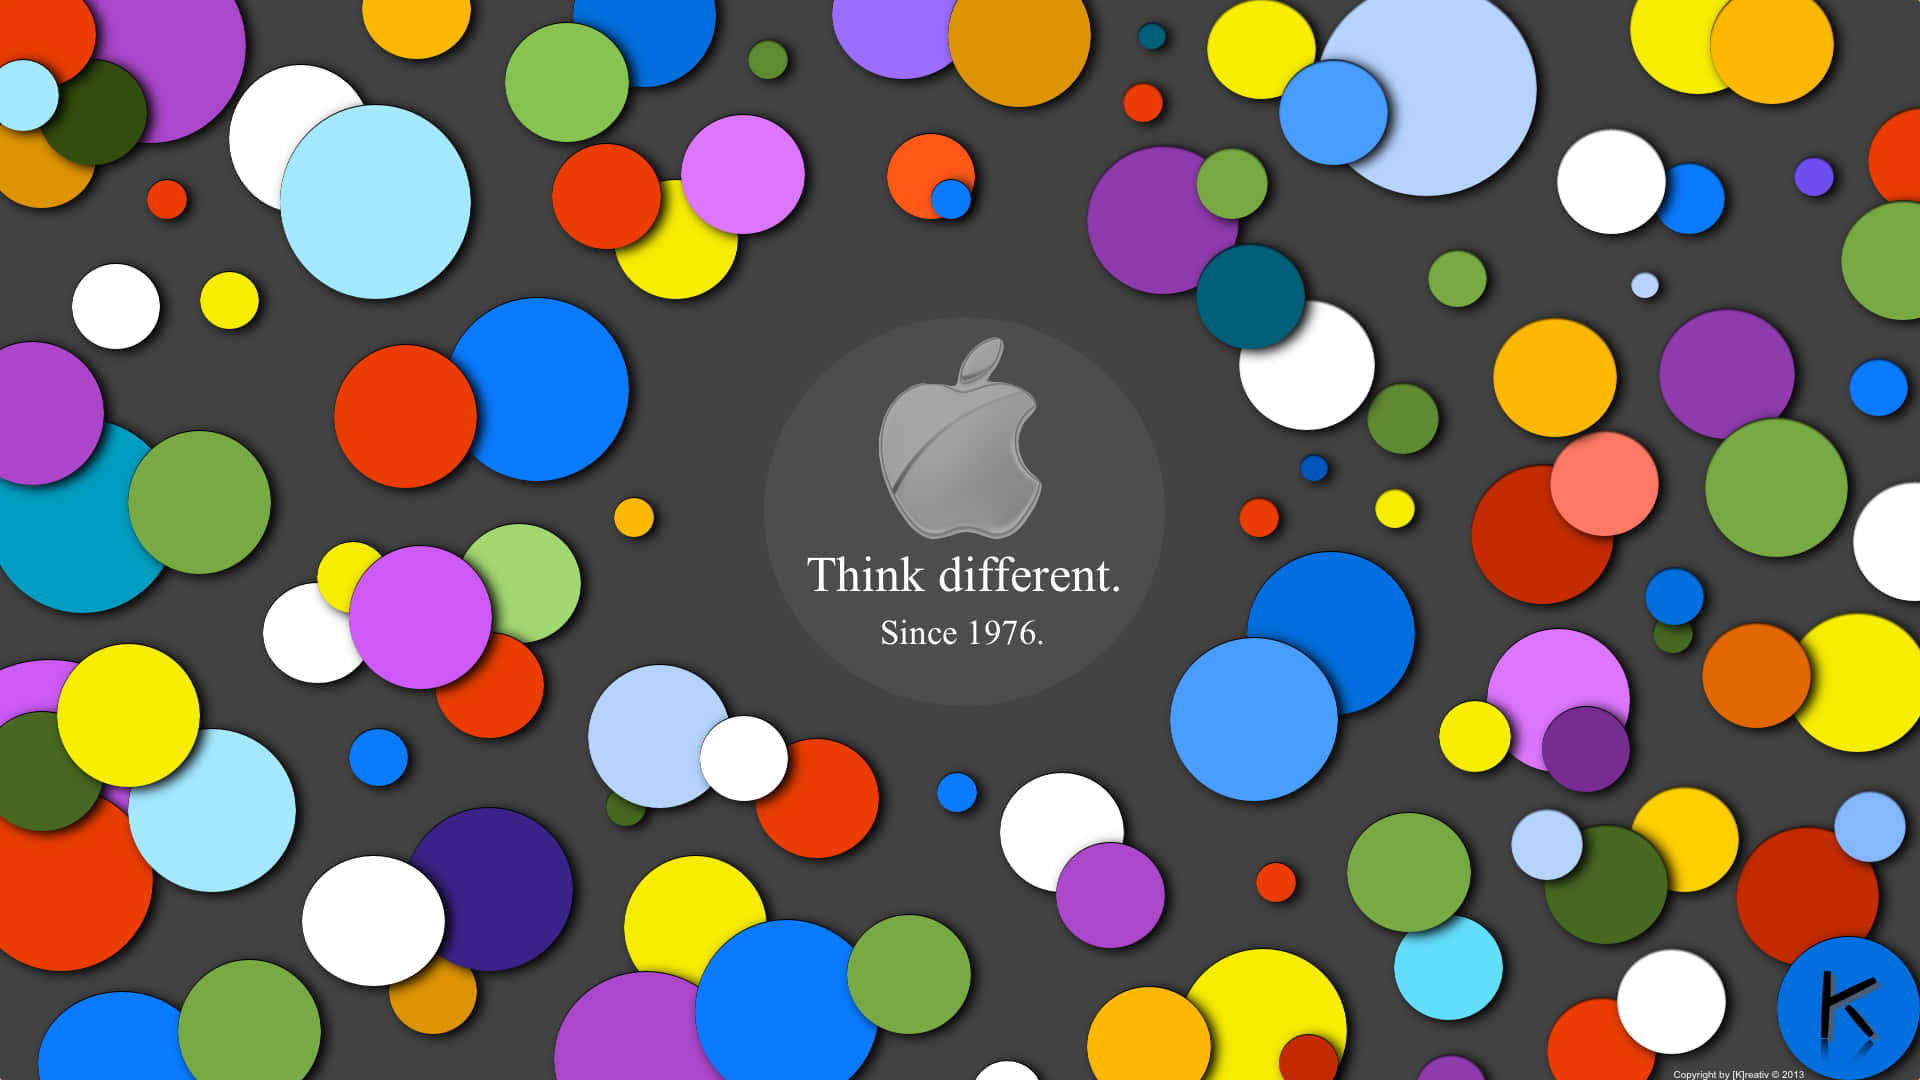 Apple Logo With Colorful Circles On A Dark Background Wallpaper